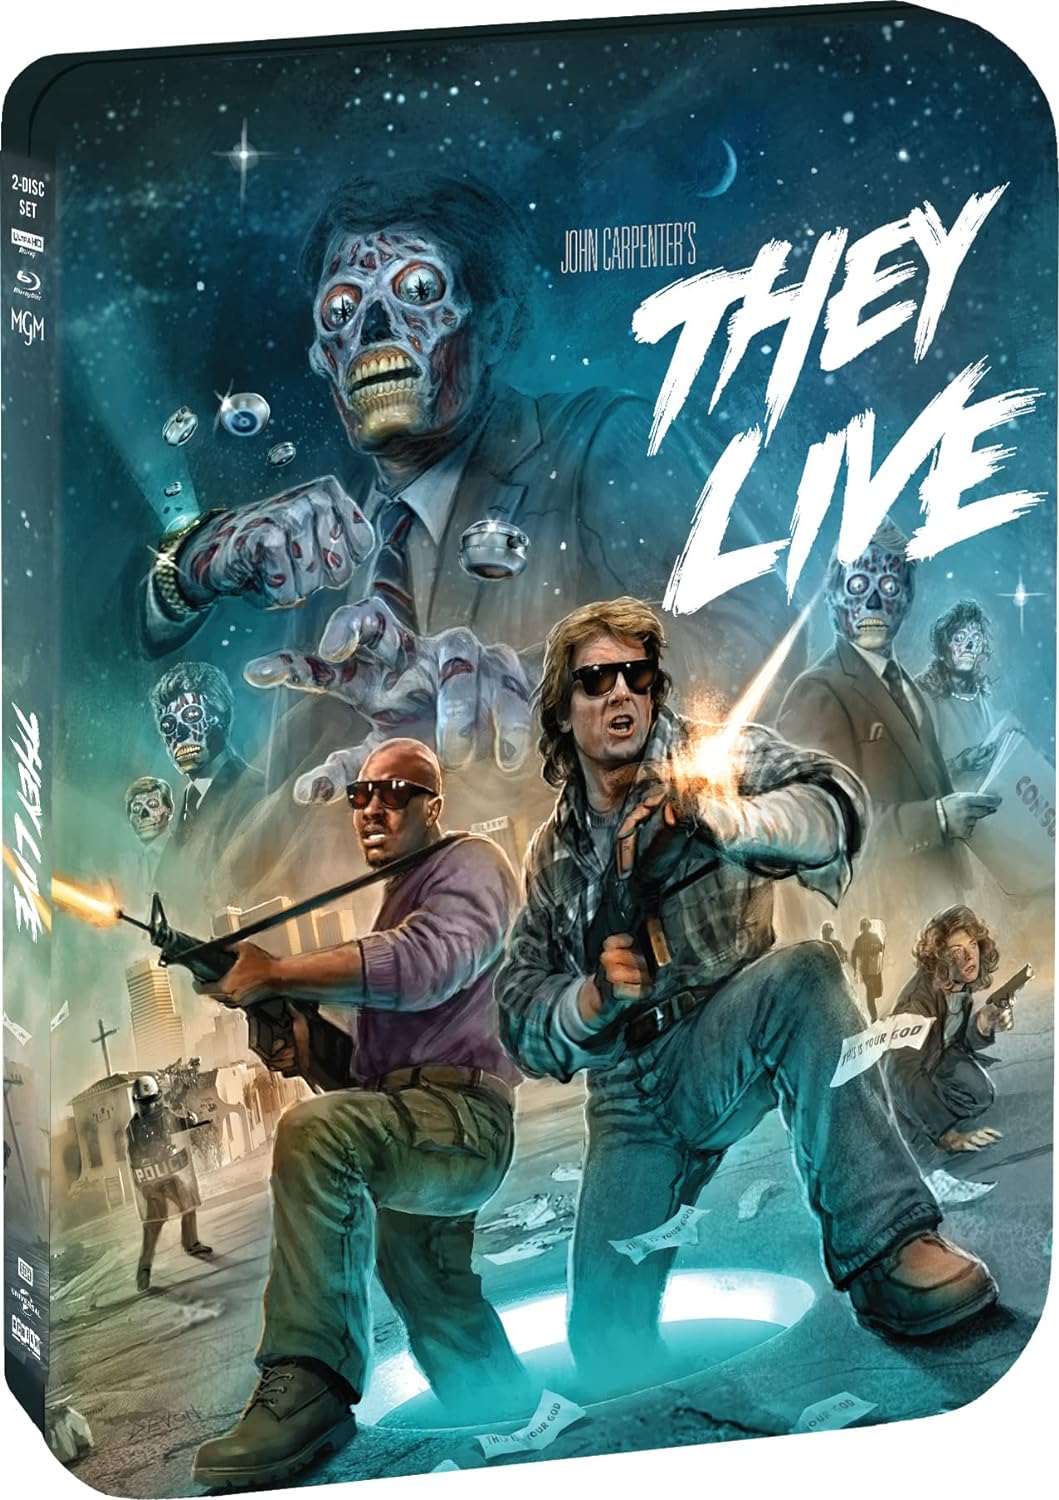 They Live Limited Edition Scream Factory 4K UHD/Blu-Ray Steelbook [NEW]